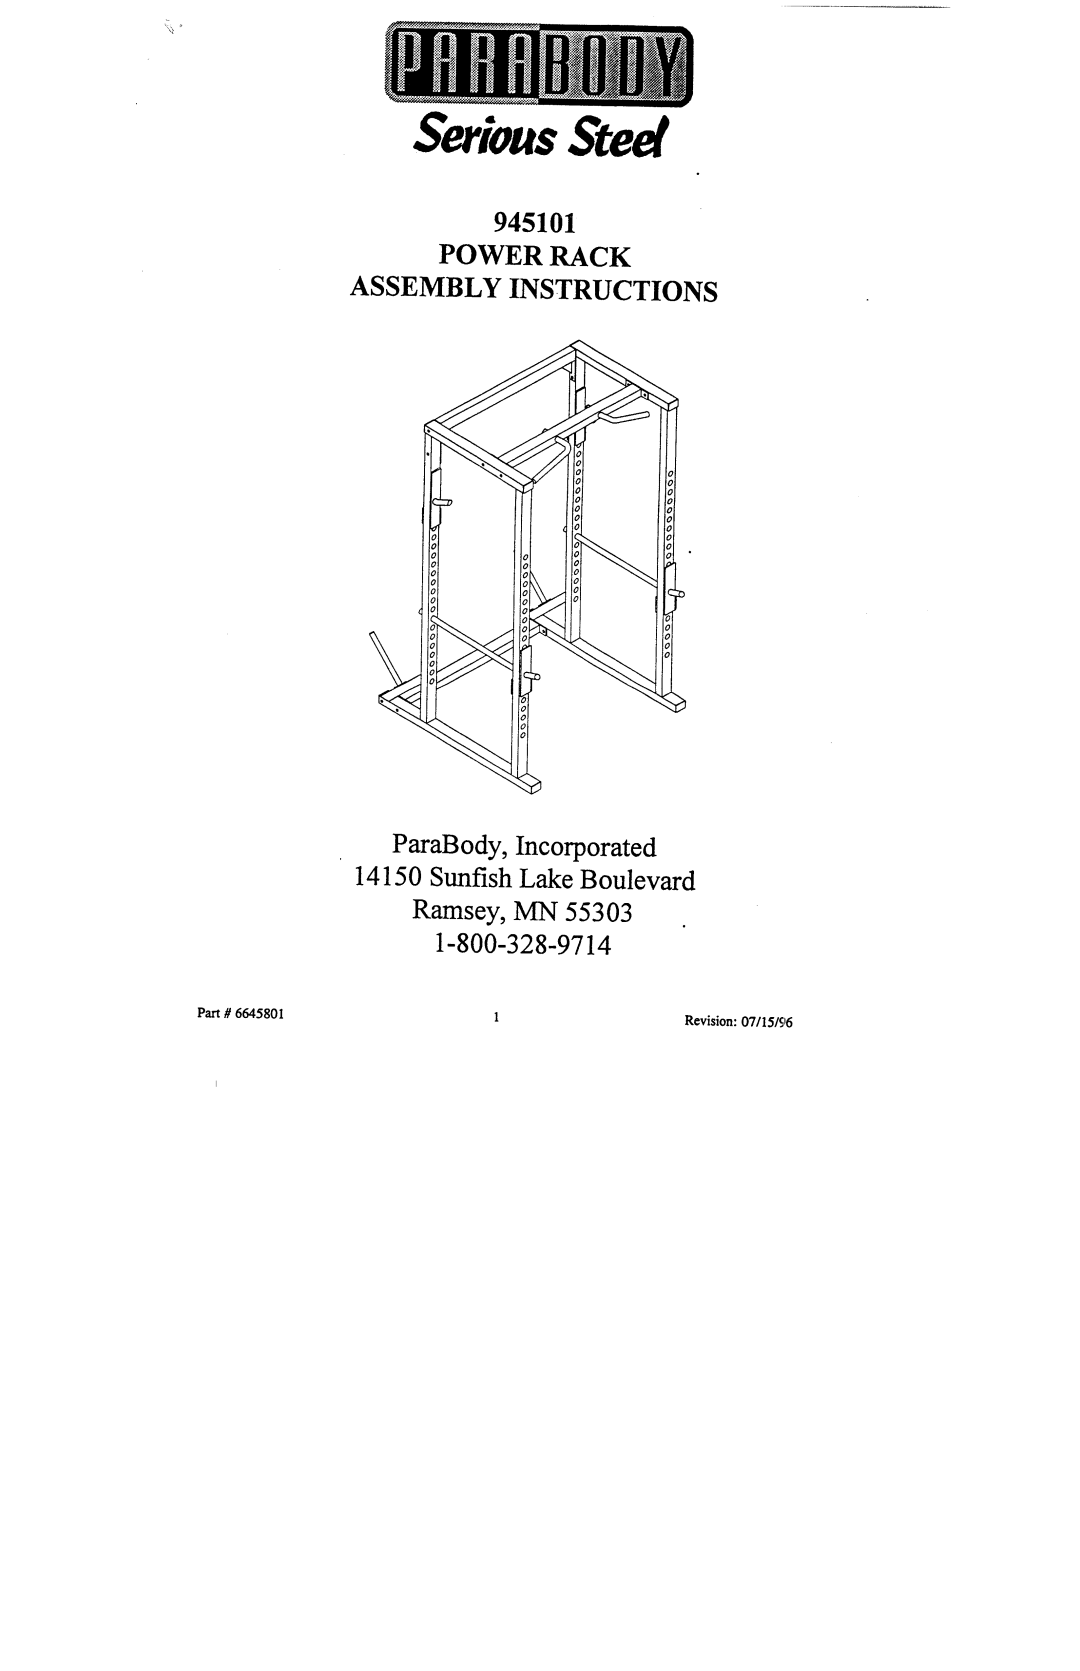 ParaBody 945101 manual SeriousSteel, Power Rack Assembly Instructions, Part# 